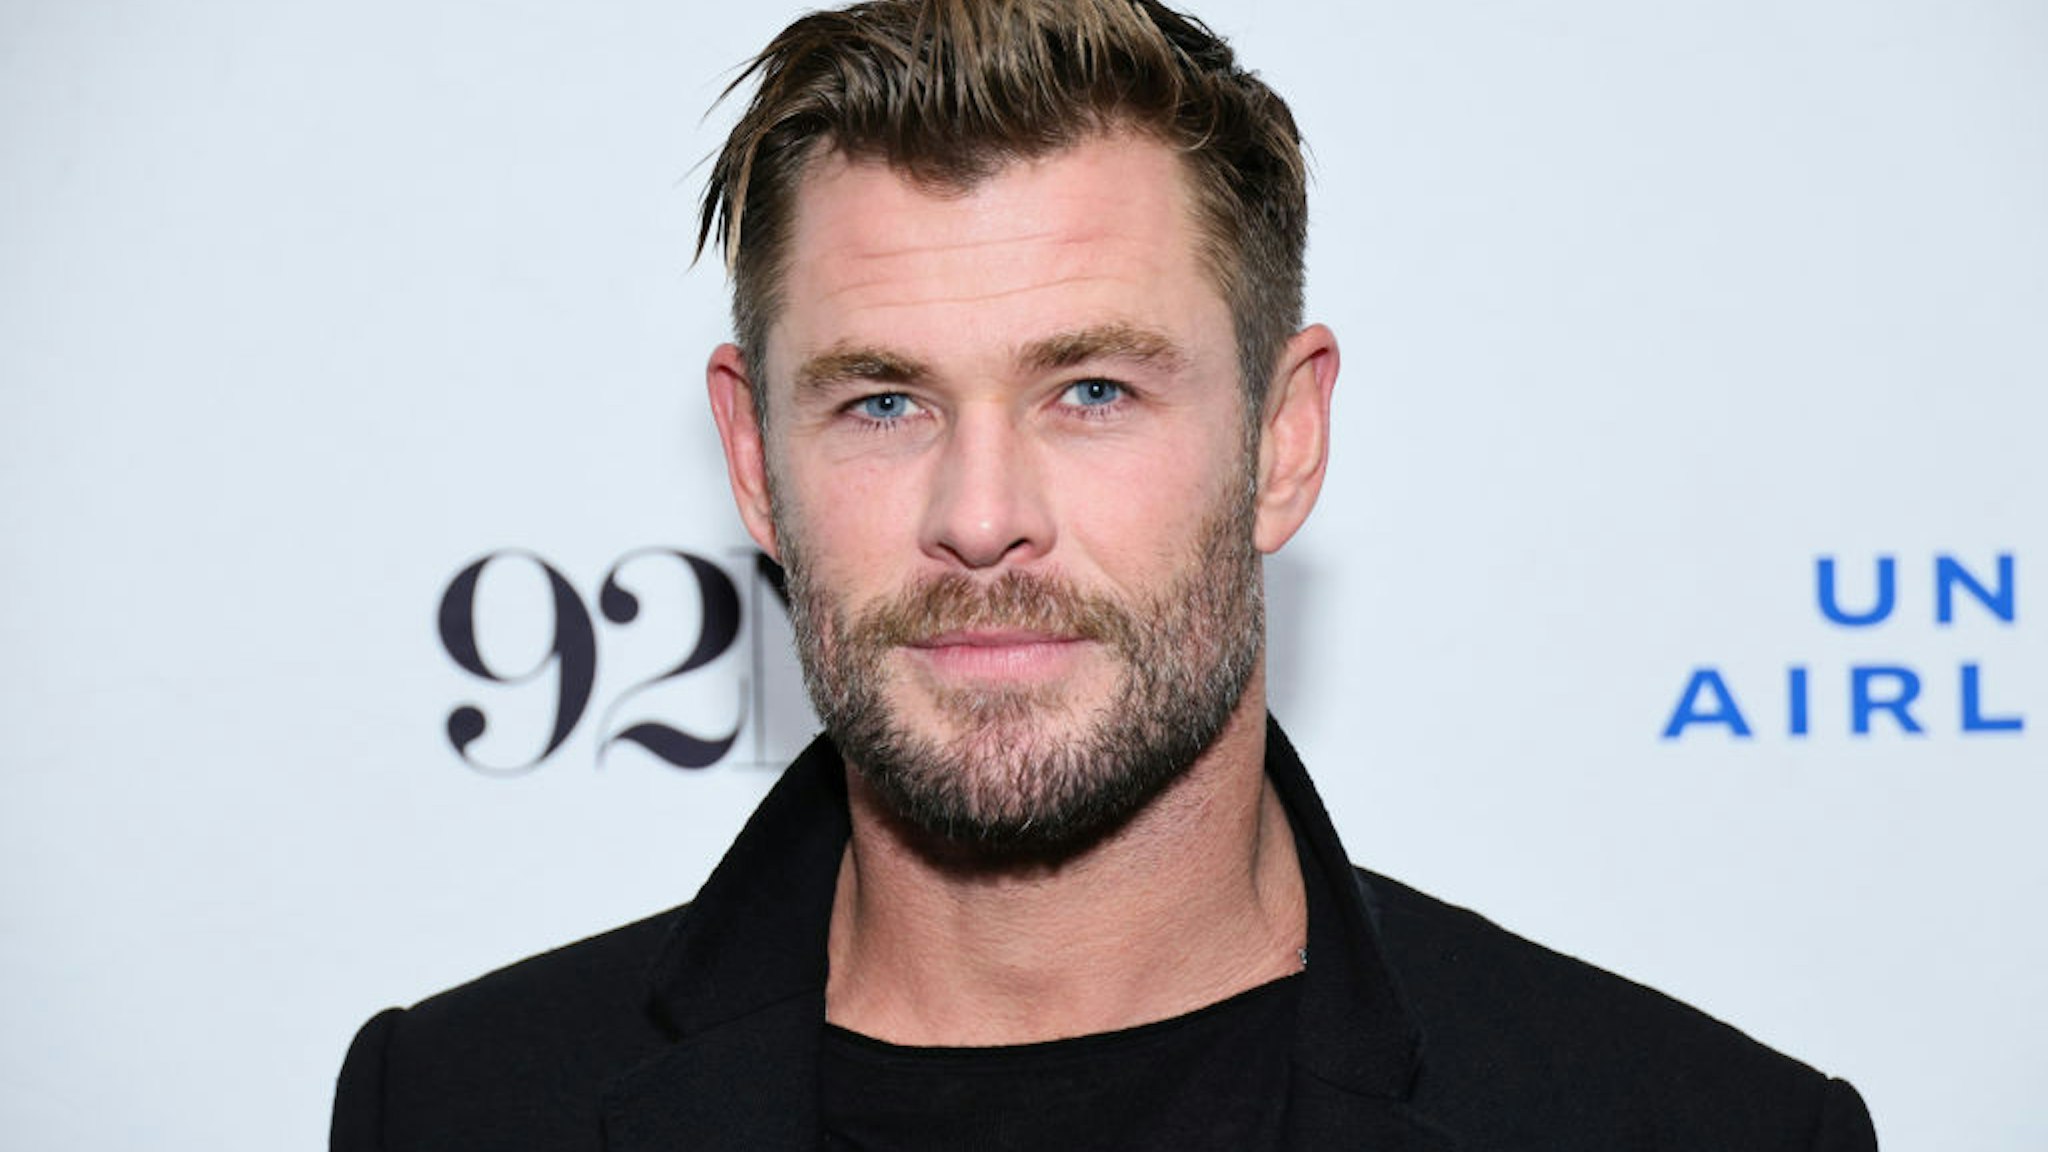 NEW YORK, NEW YORK - NOVEMBER 16: Chris Hemsworth attends National Geographic's "Limitless" Screening And Conversation at The 92nd Street Y, New York on November 16, 2022 in New York City. (Photo by Theo Wargo/Getty Images)